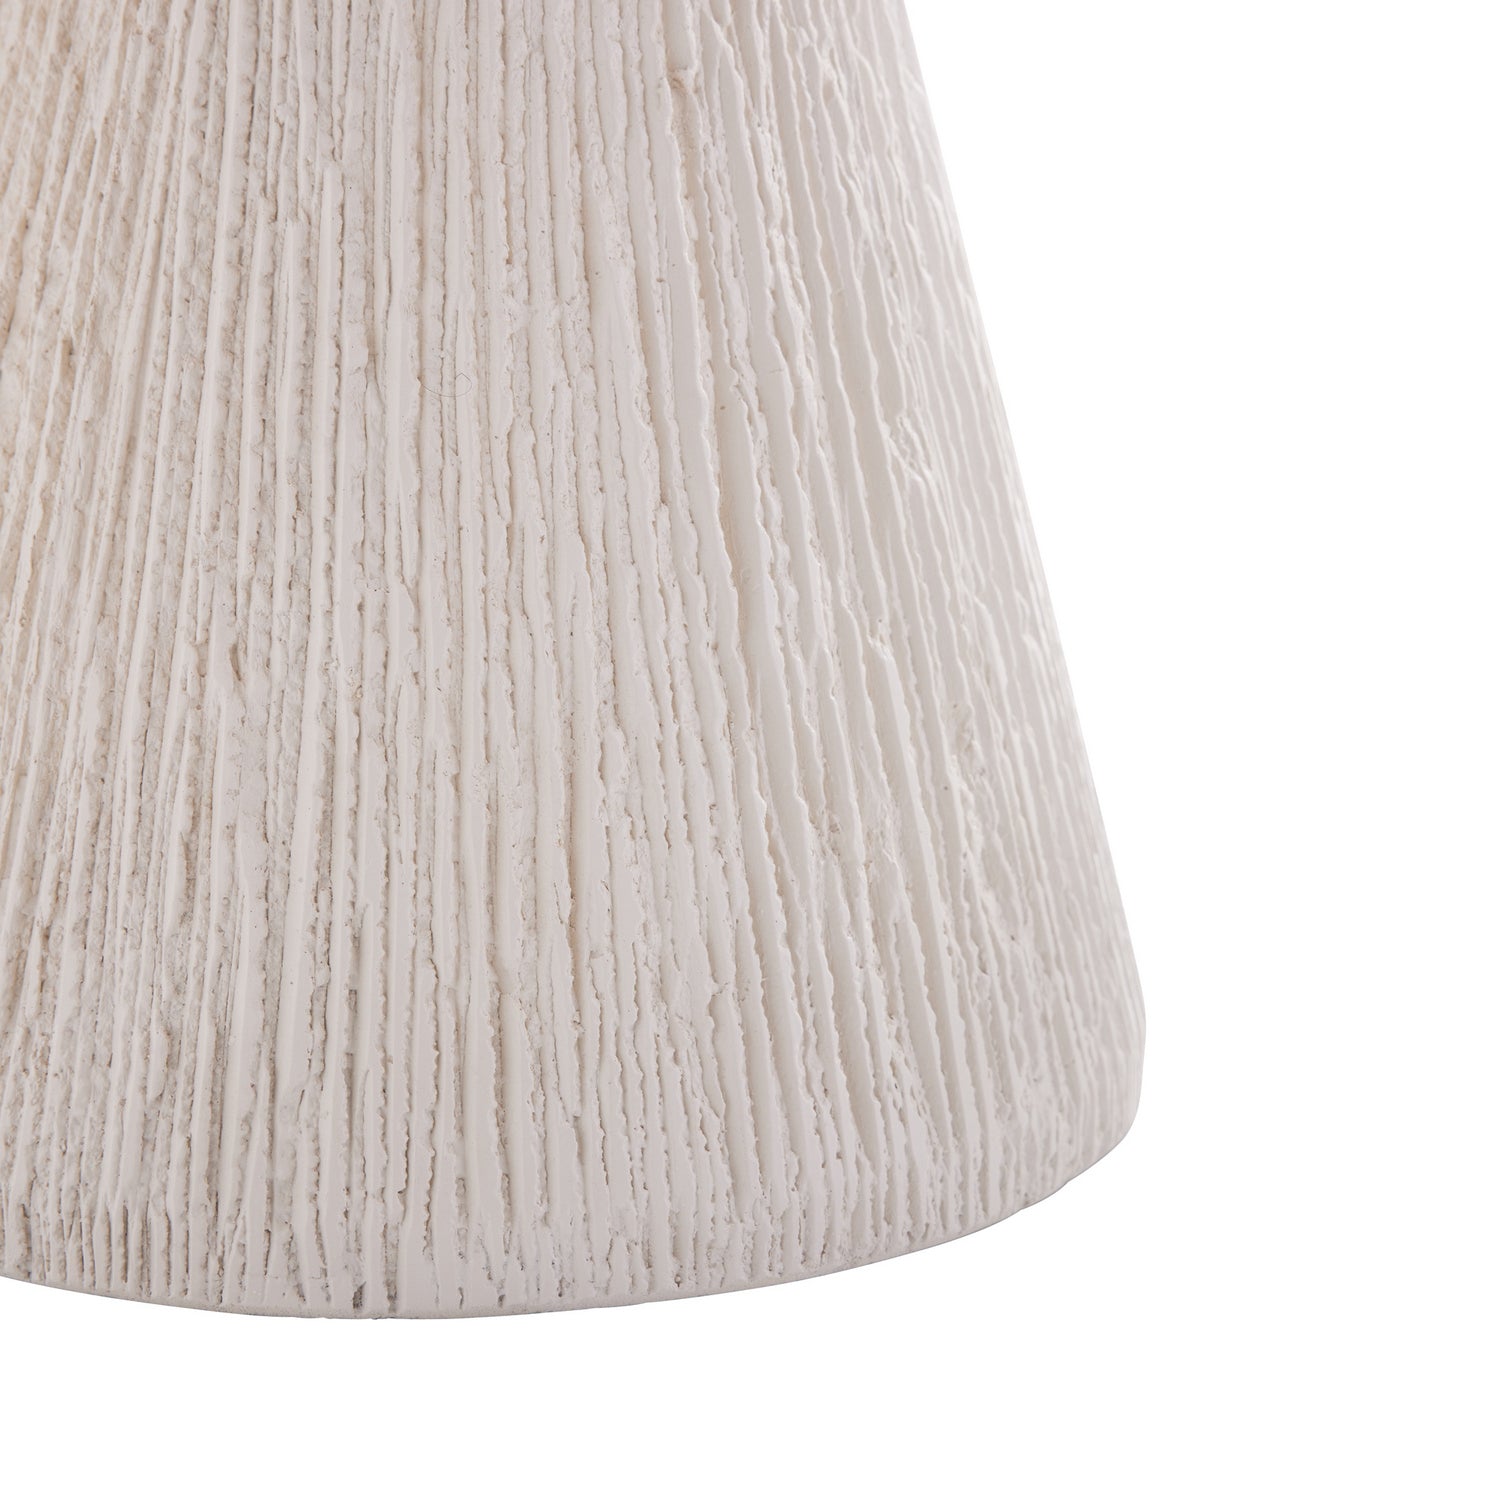 Accent Table from the Nika collection in Ivory finish